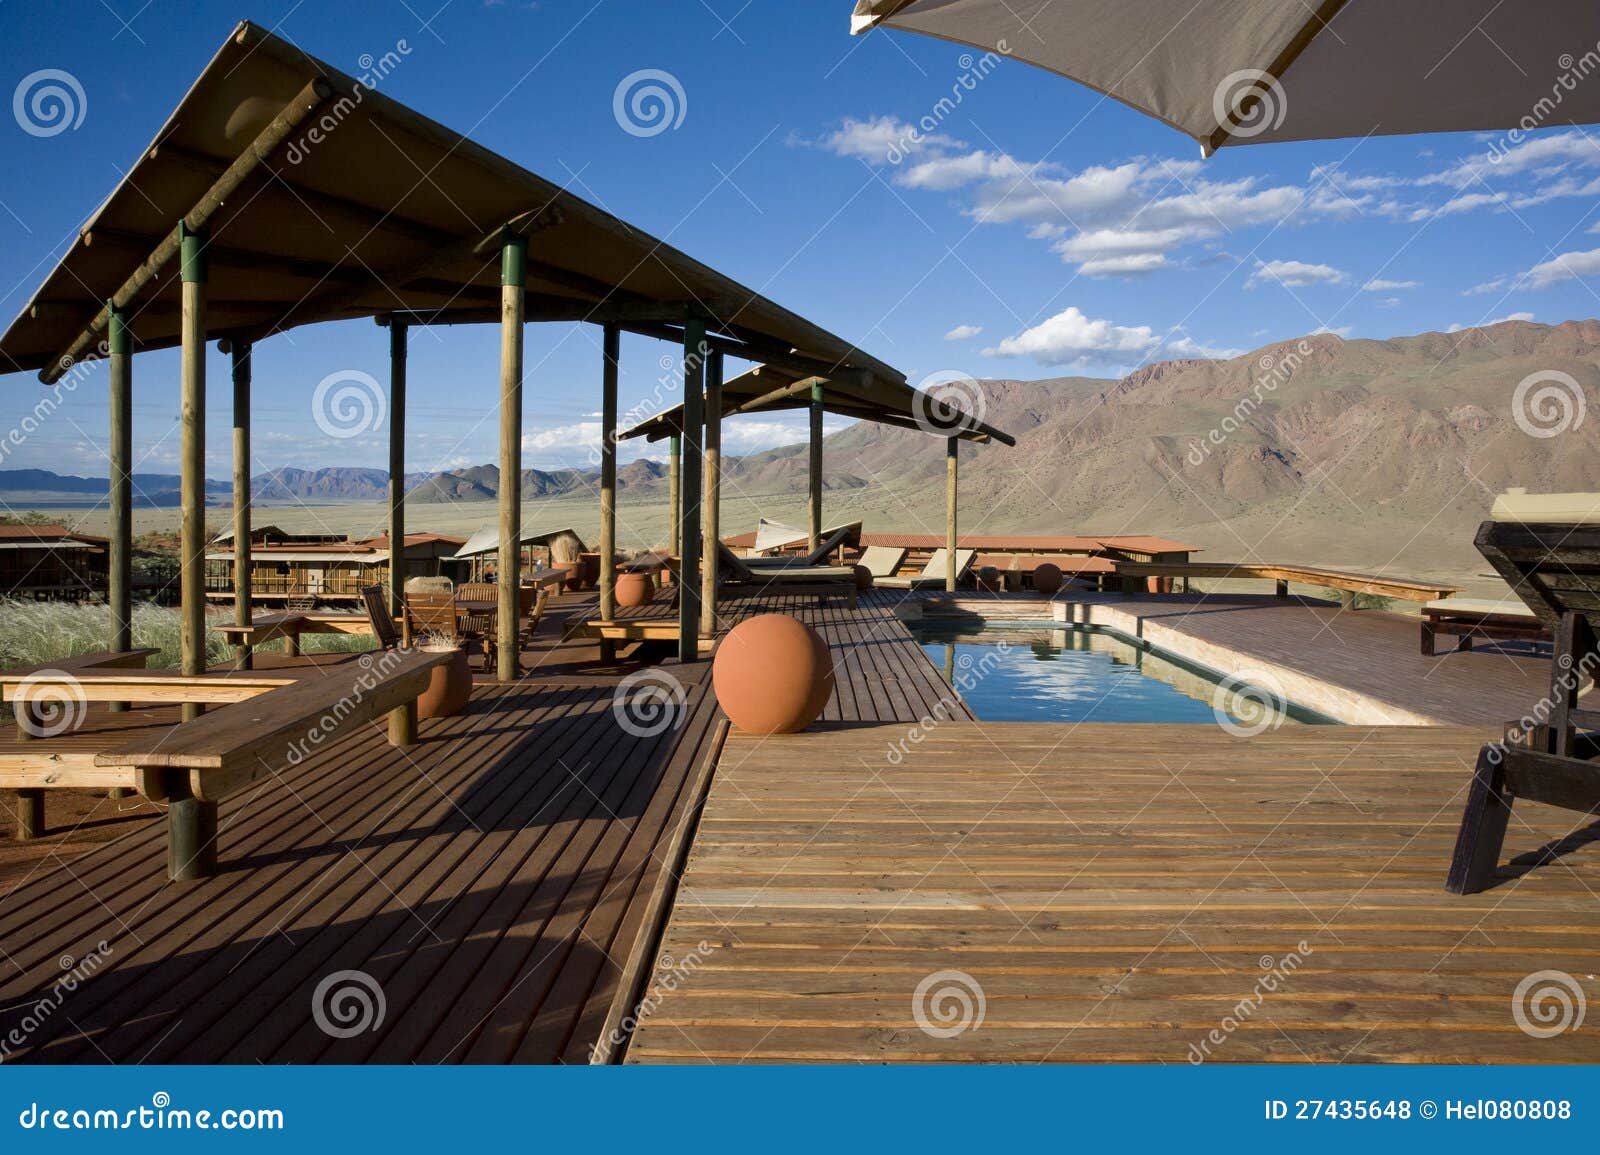 pool of a lodge in namibia